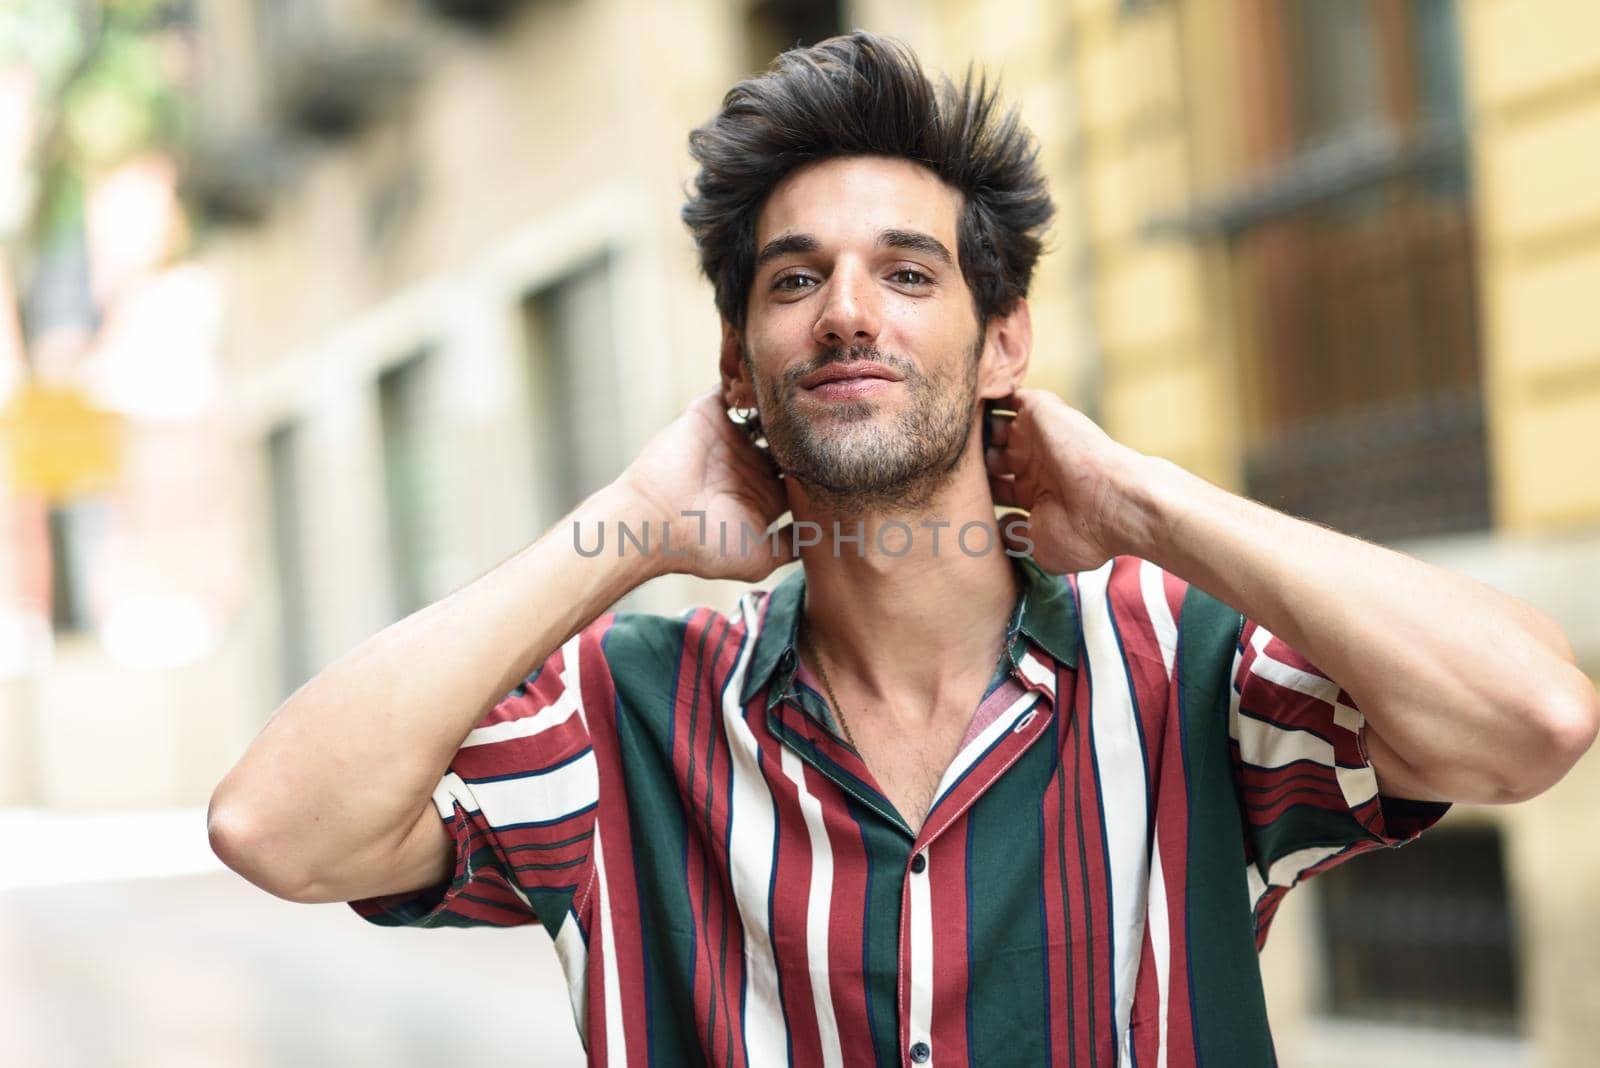 Attractive young man with dark hair and modern hairstyle wearing casual clothes in urban background.